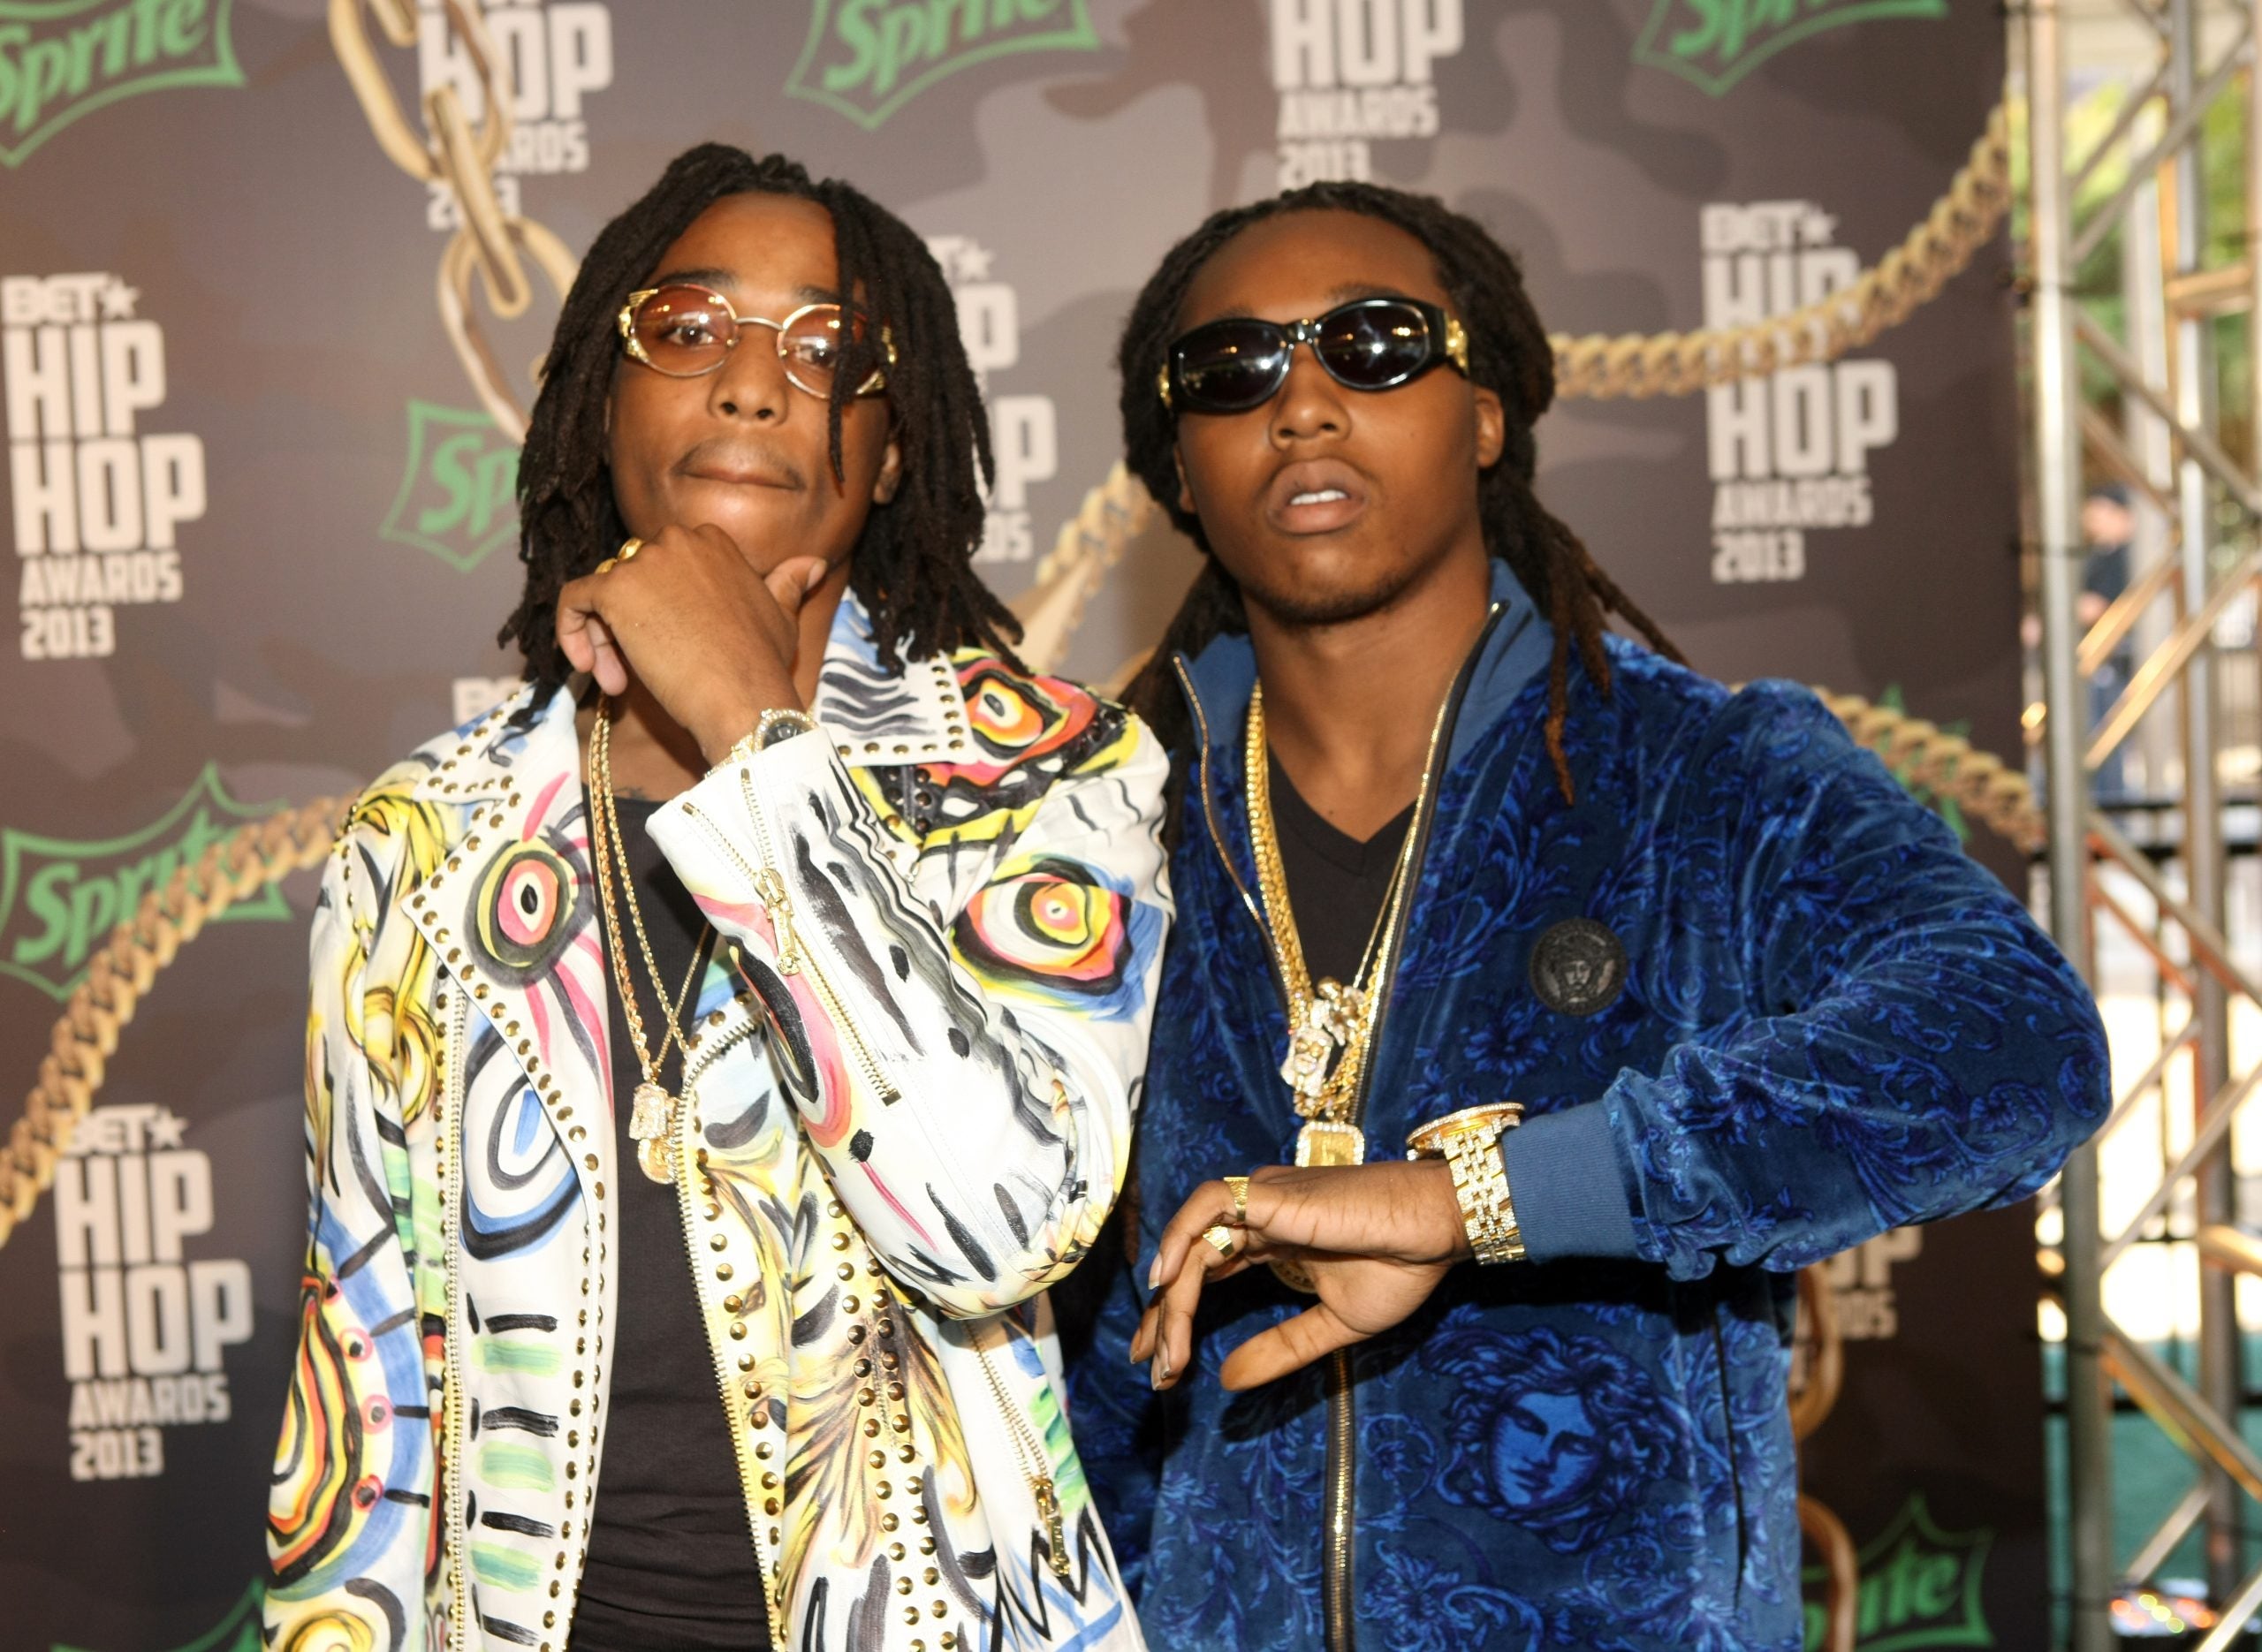 A Look Back At Takeoff's Career In Photos